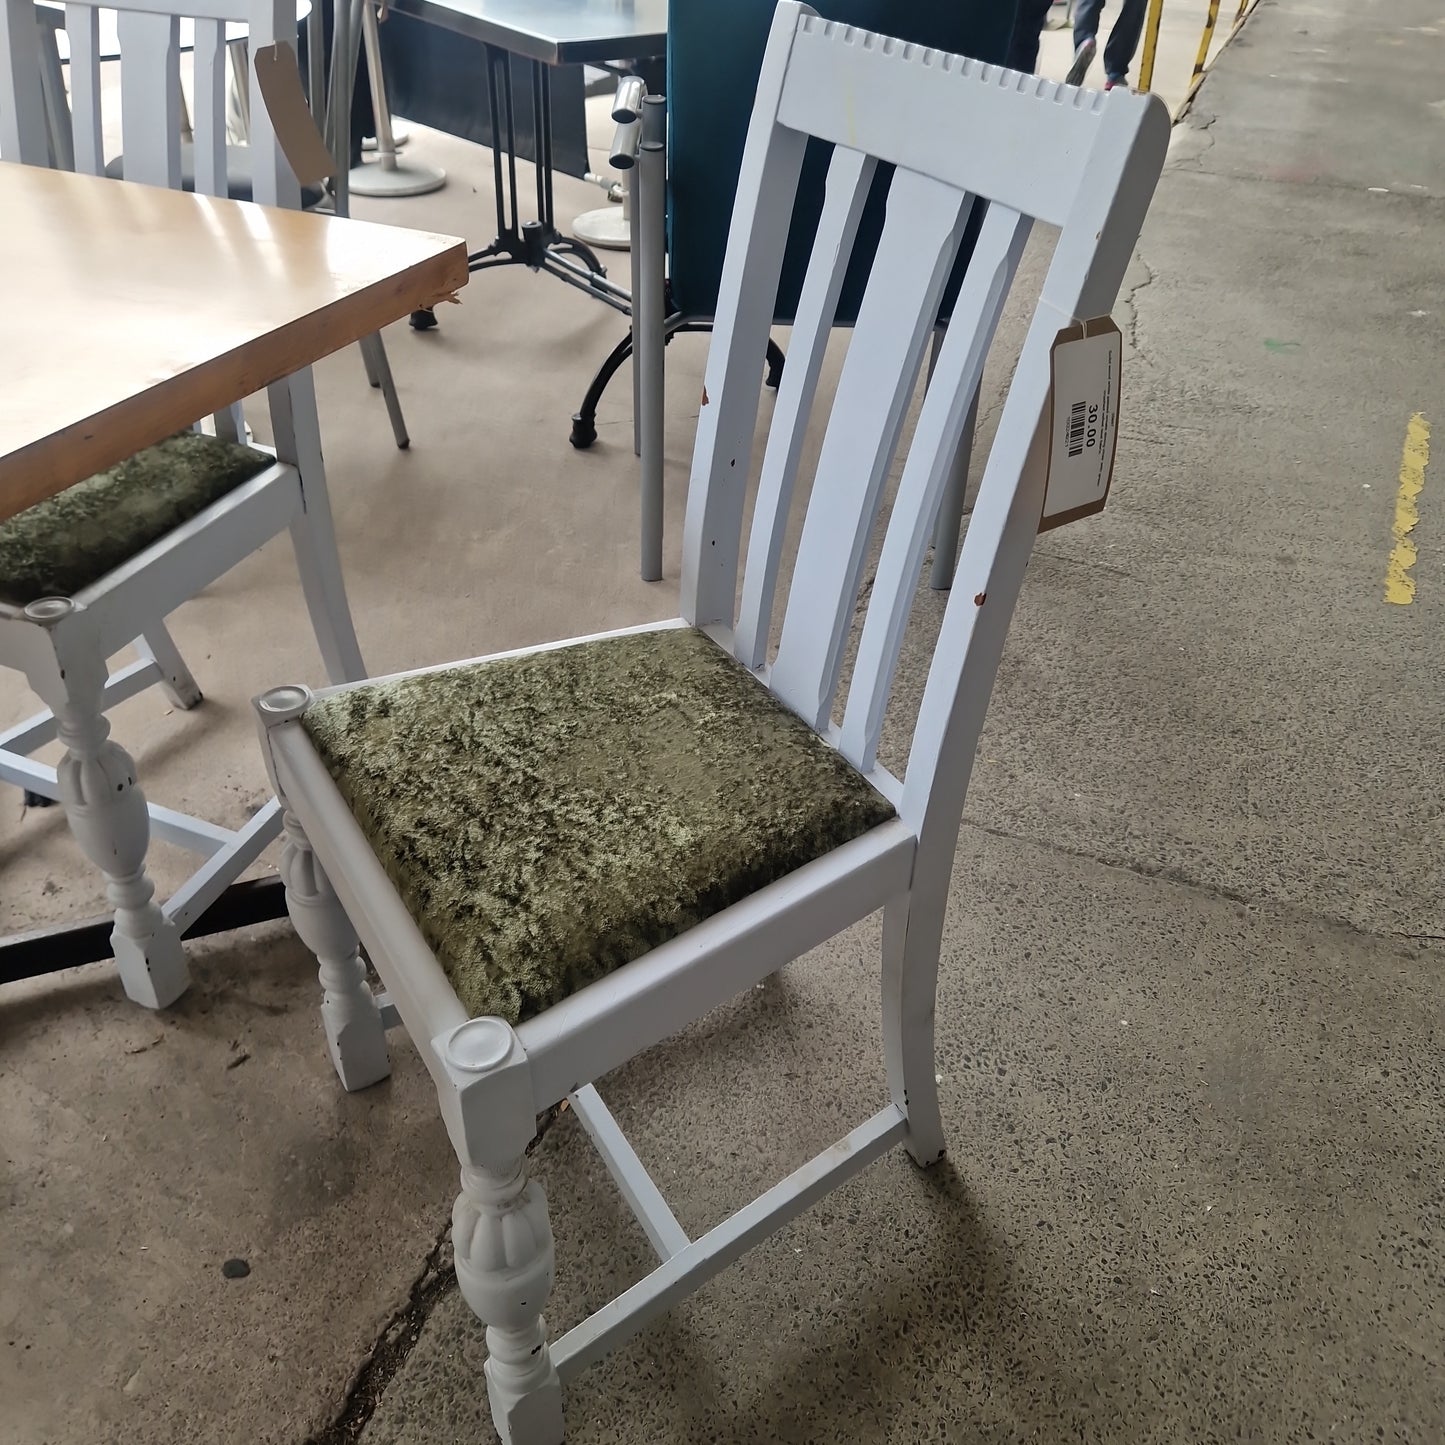 Solid wood white pained ornate dining chair with green crushed velvet seat fabric